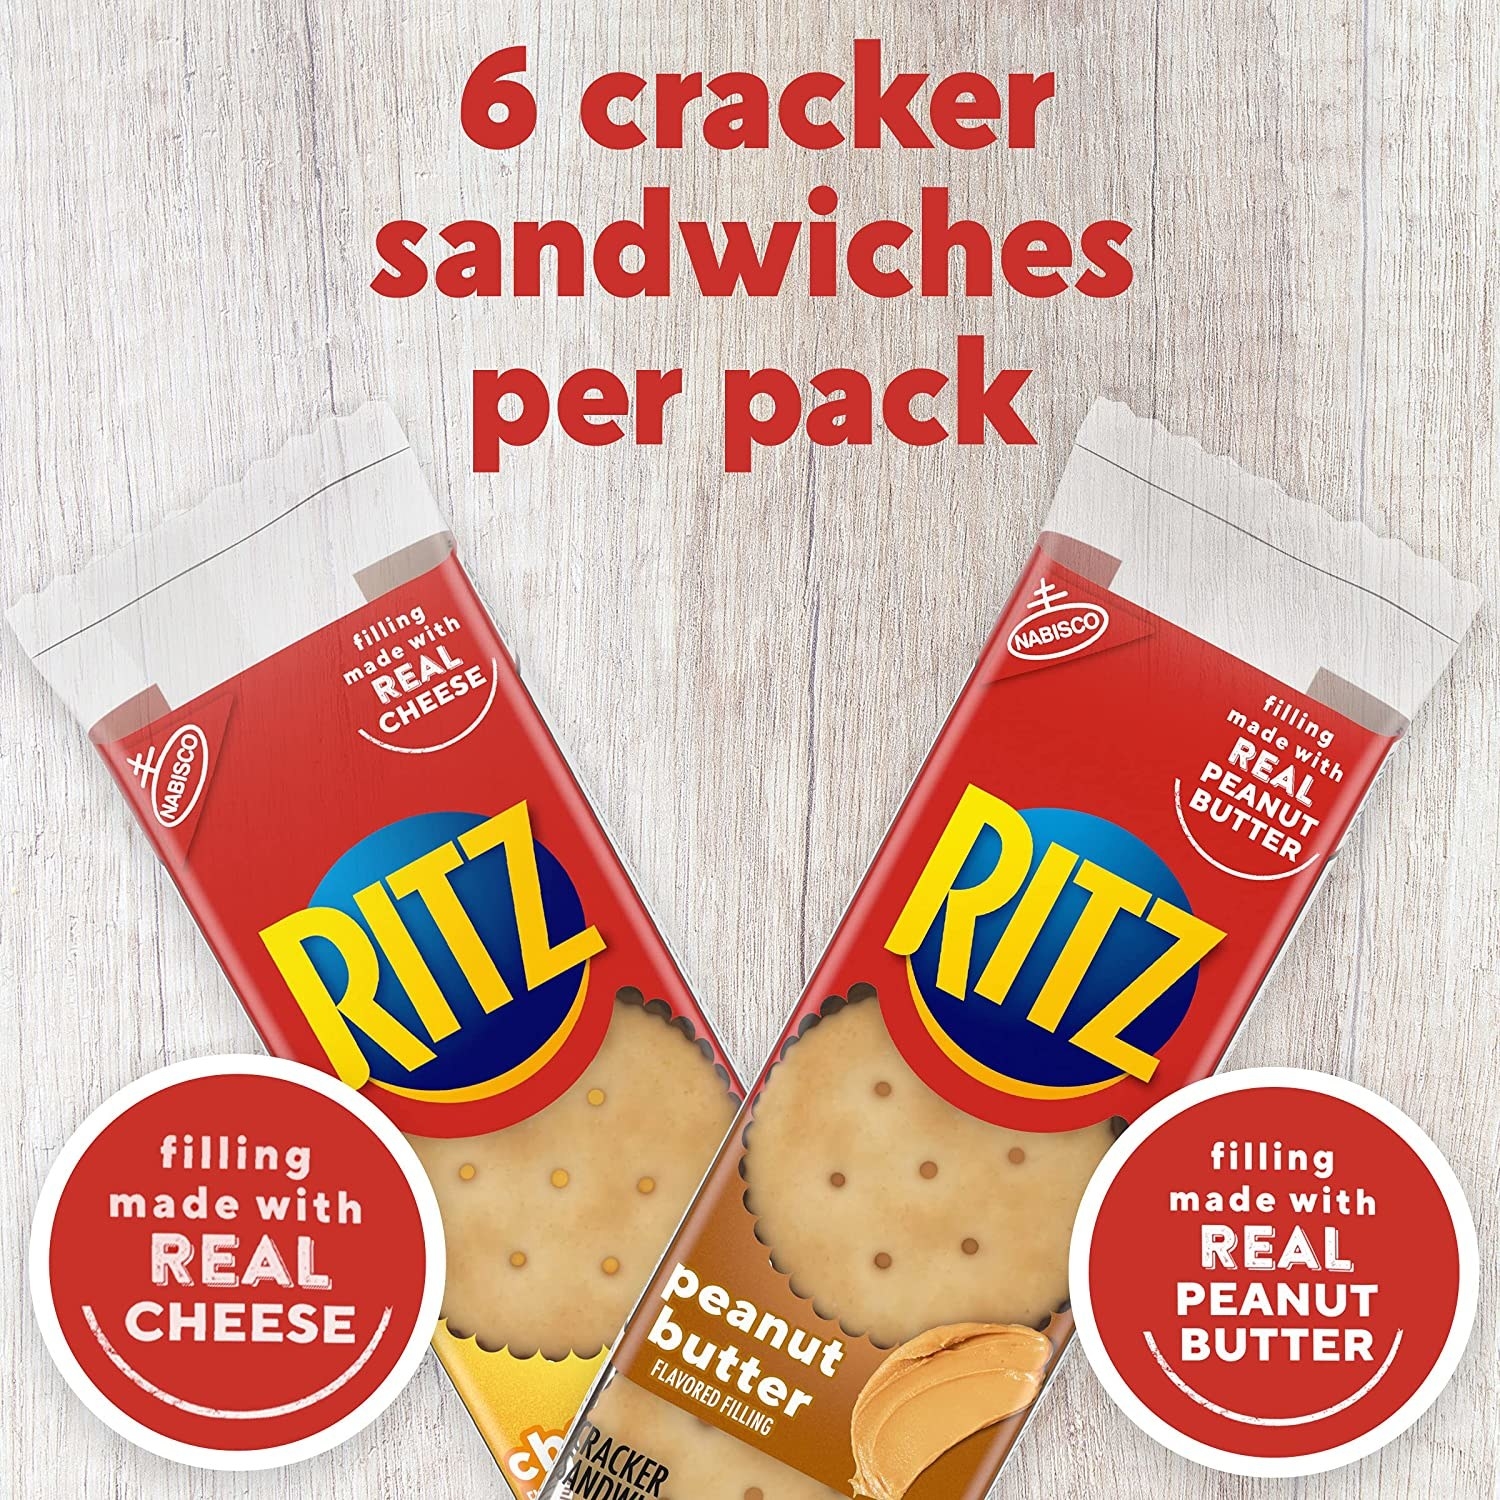 The sandwich crackers